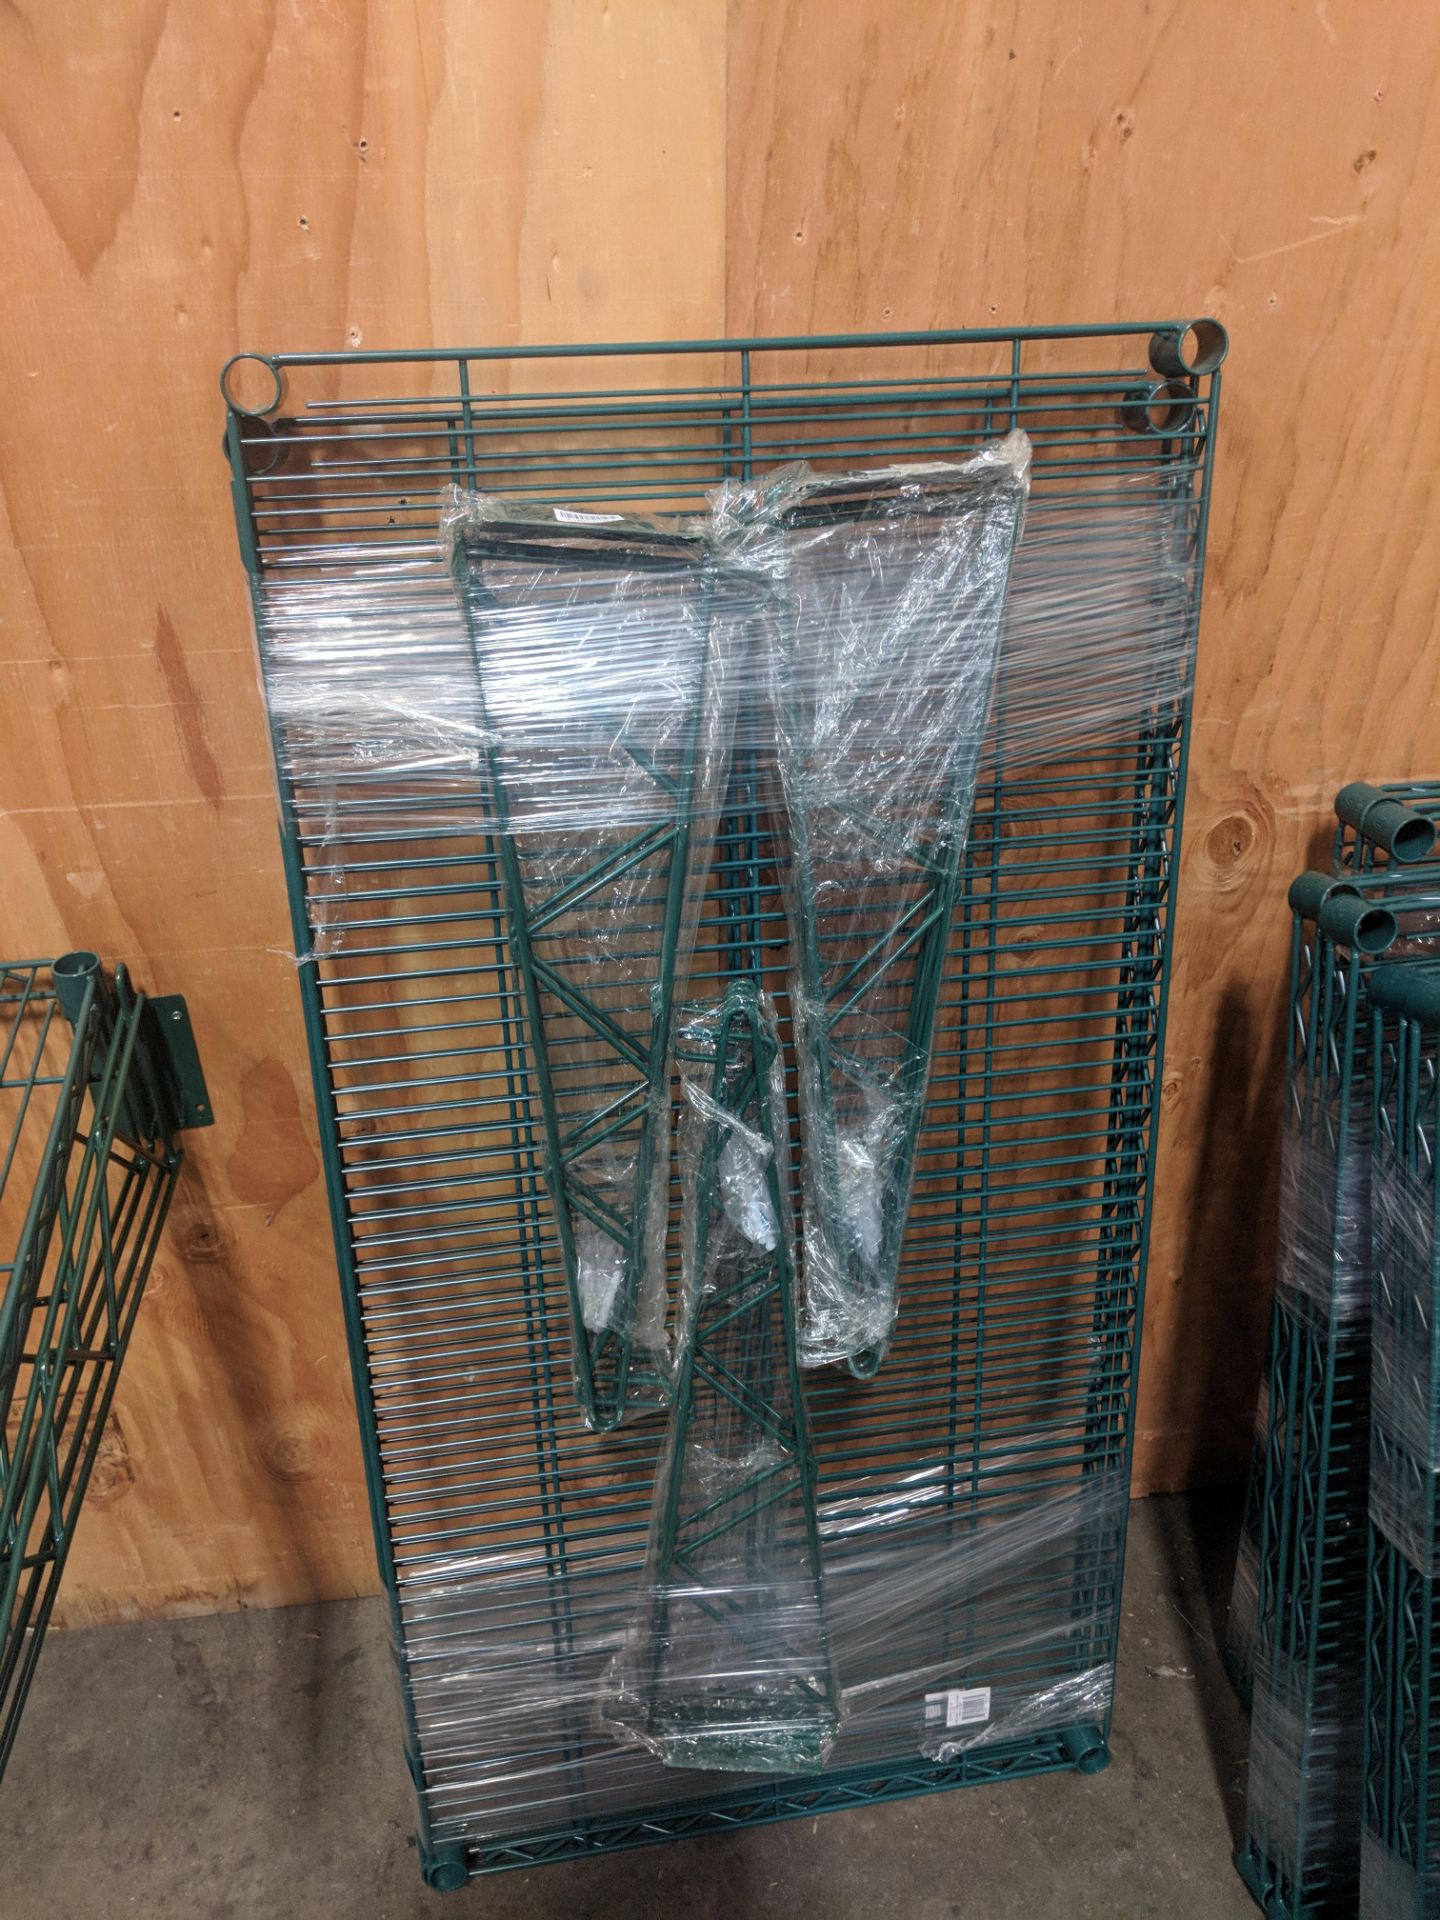 96" Epoxy Wire Shelving Section - Lot of 5 Pieces - Image 2 of 2